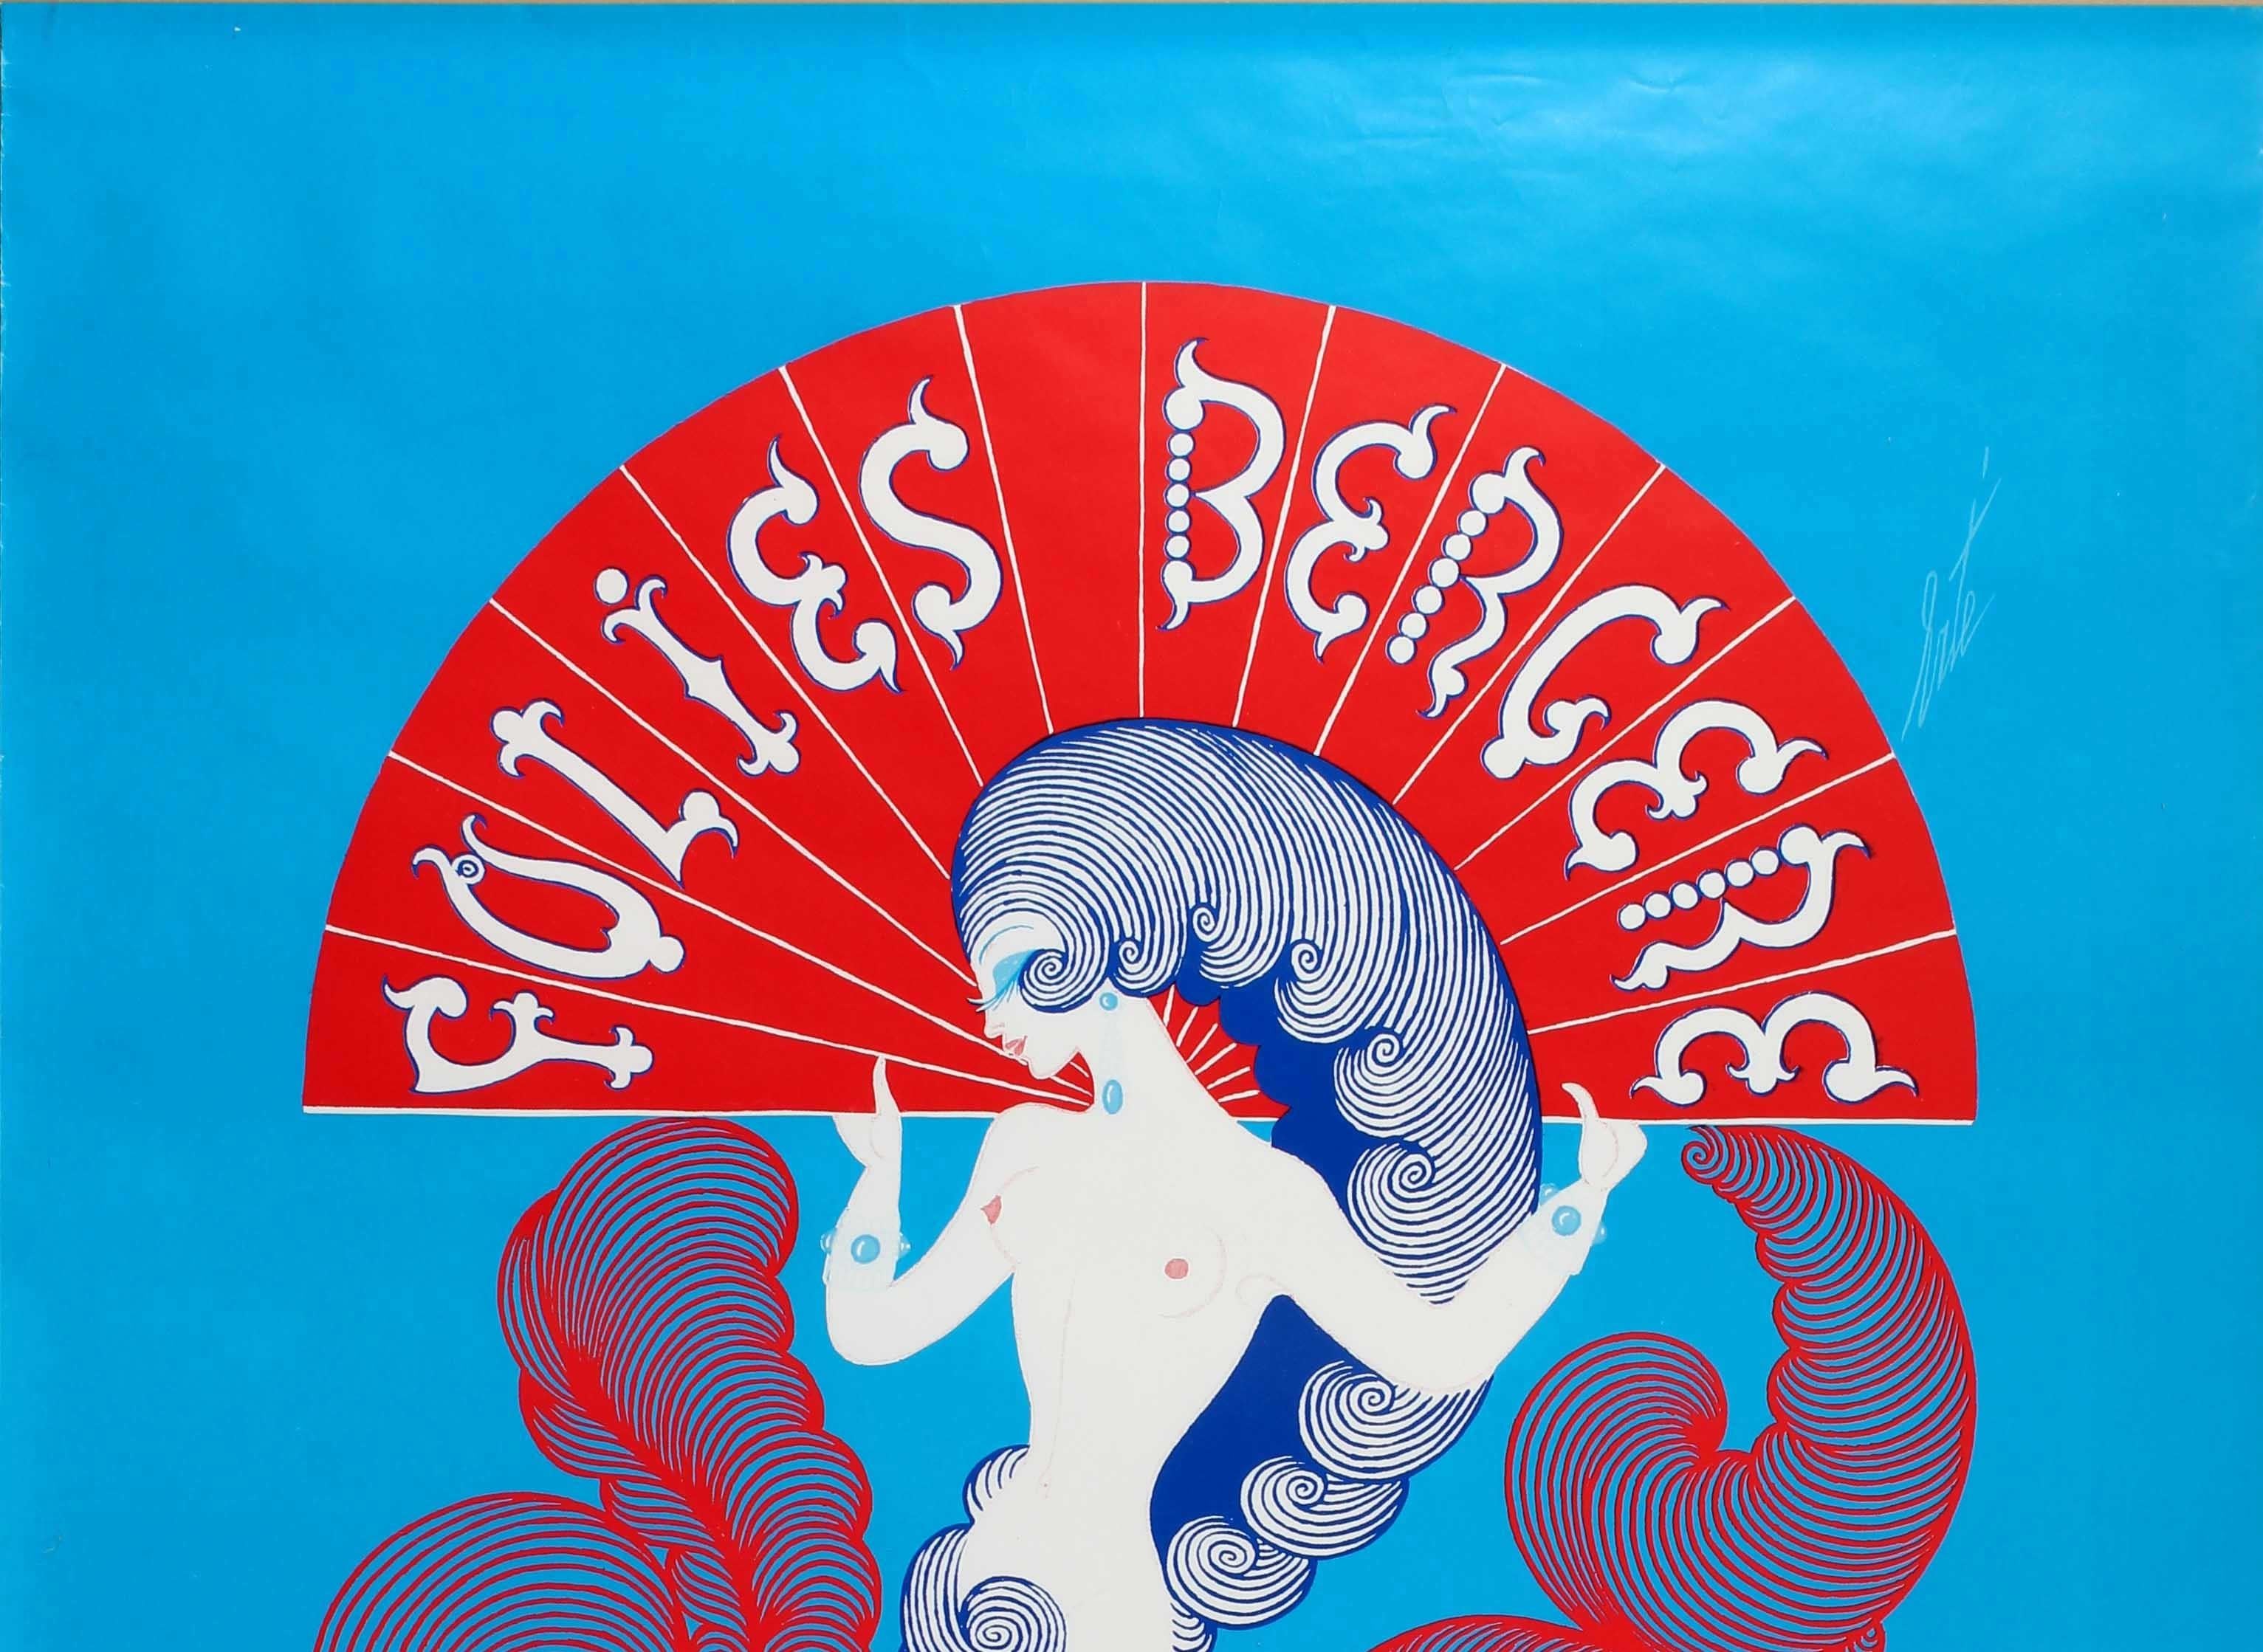 Original vintage advertising poster for the famous French cabaret music show Folies Bergere - The new revue by Helene Martini with direction, set design and costume by Michel Gyarmathy. Colourful illustration by the notable artist and designer Erte